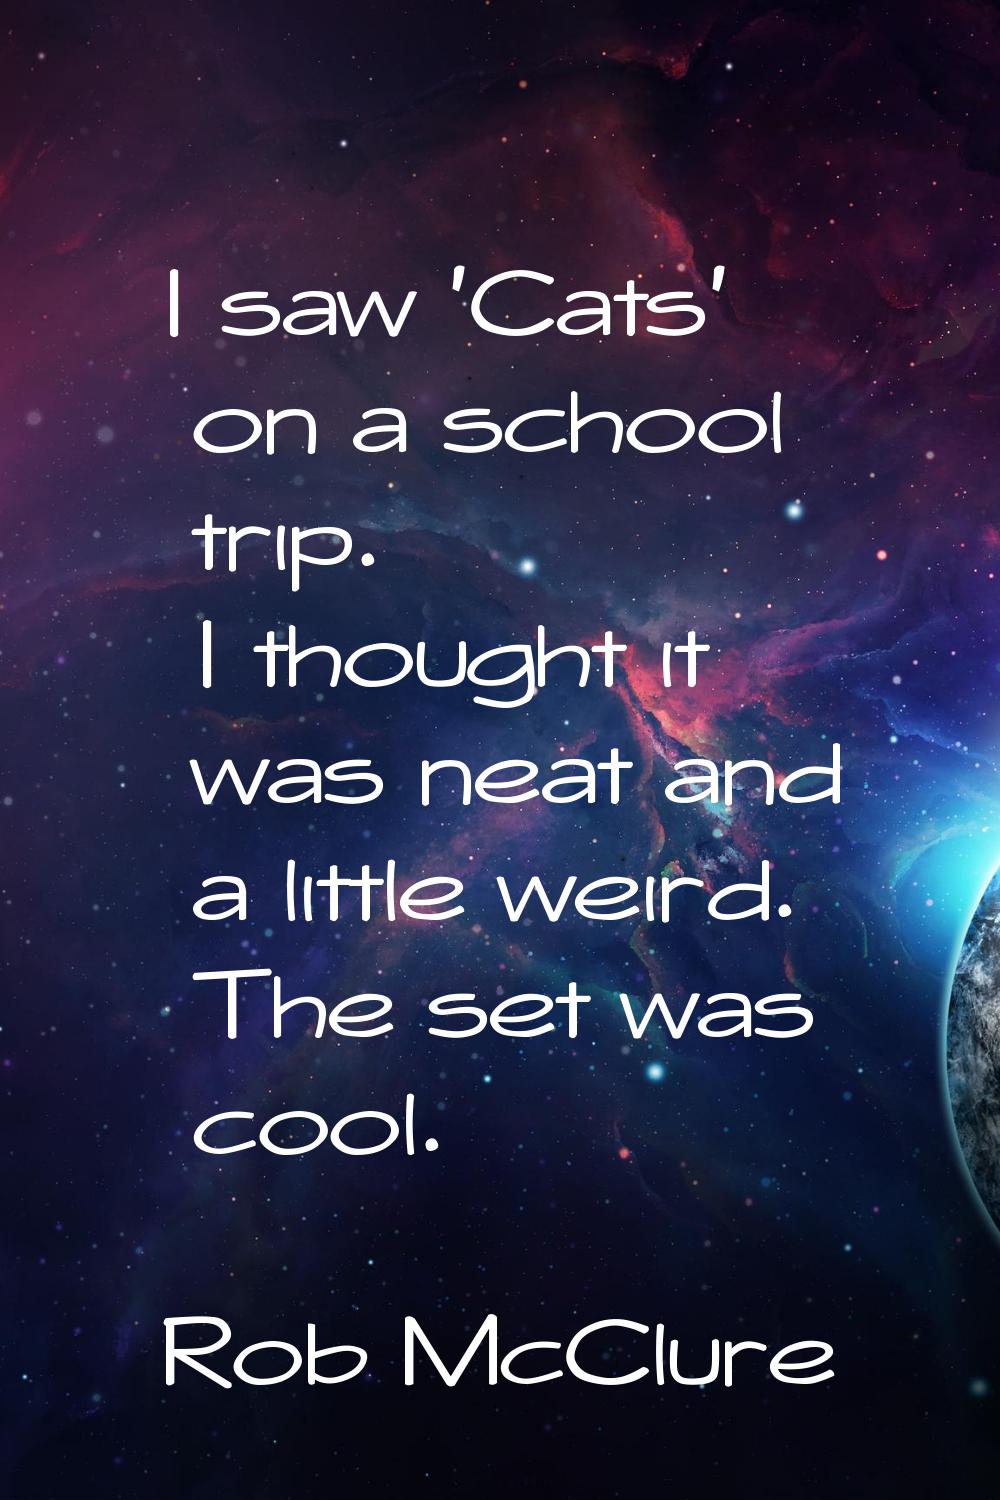 I saw 'Cats' on a school trip. I thought it was neat and a little weird. The set was cool.